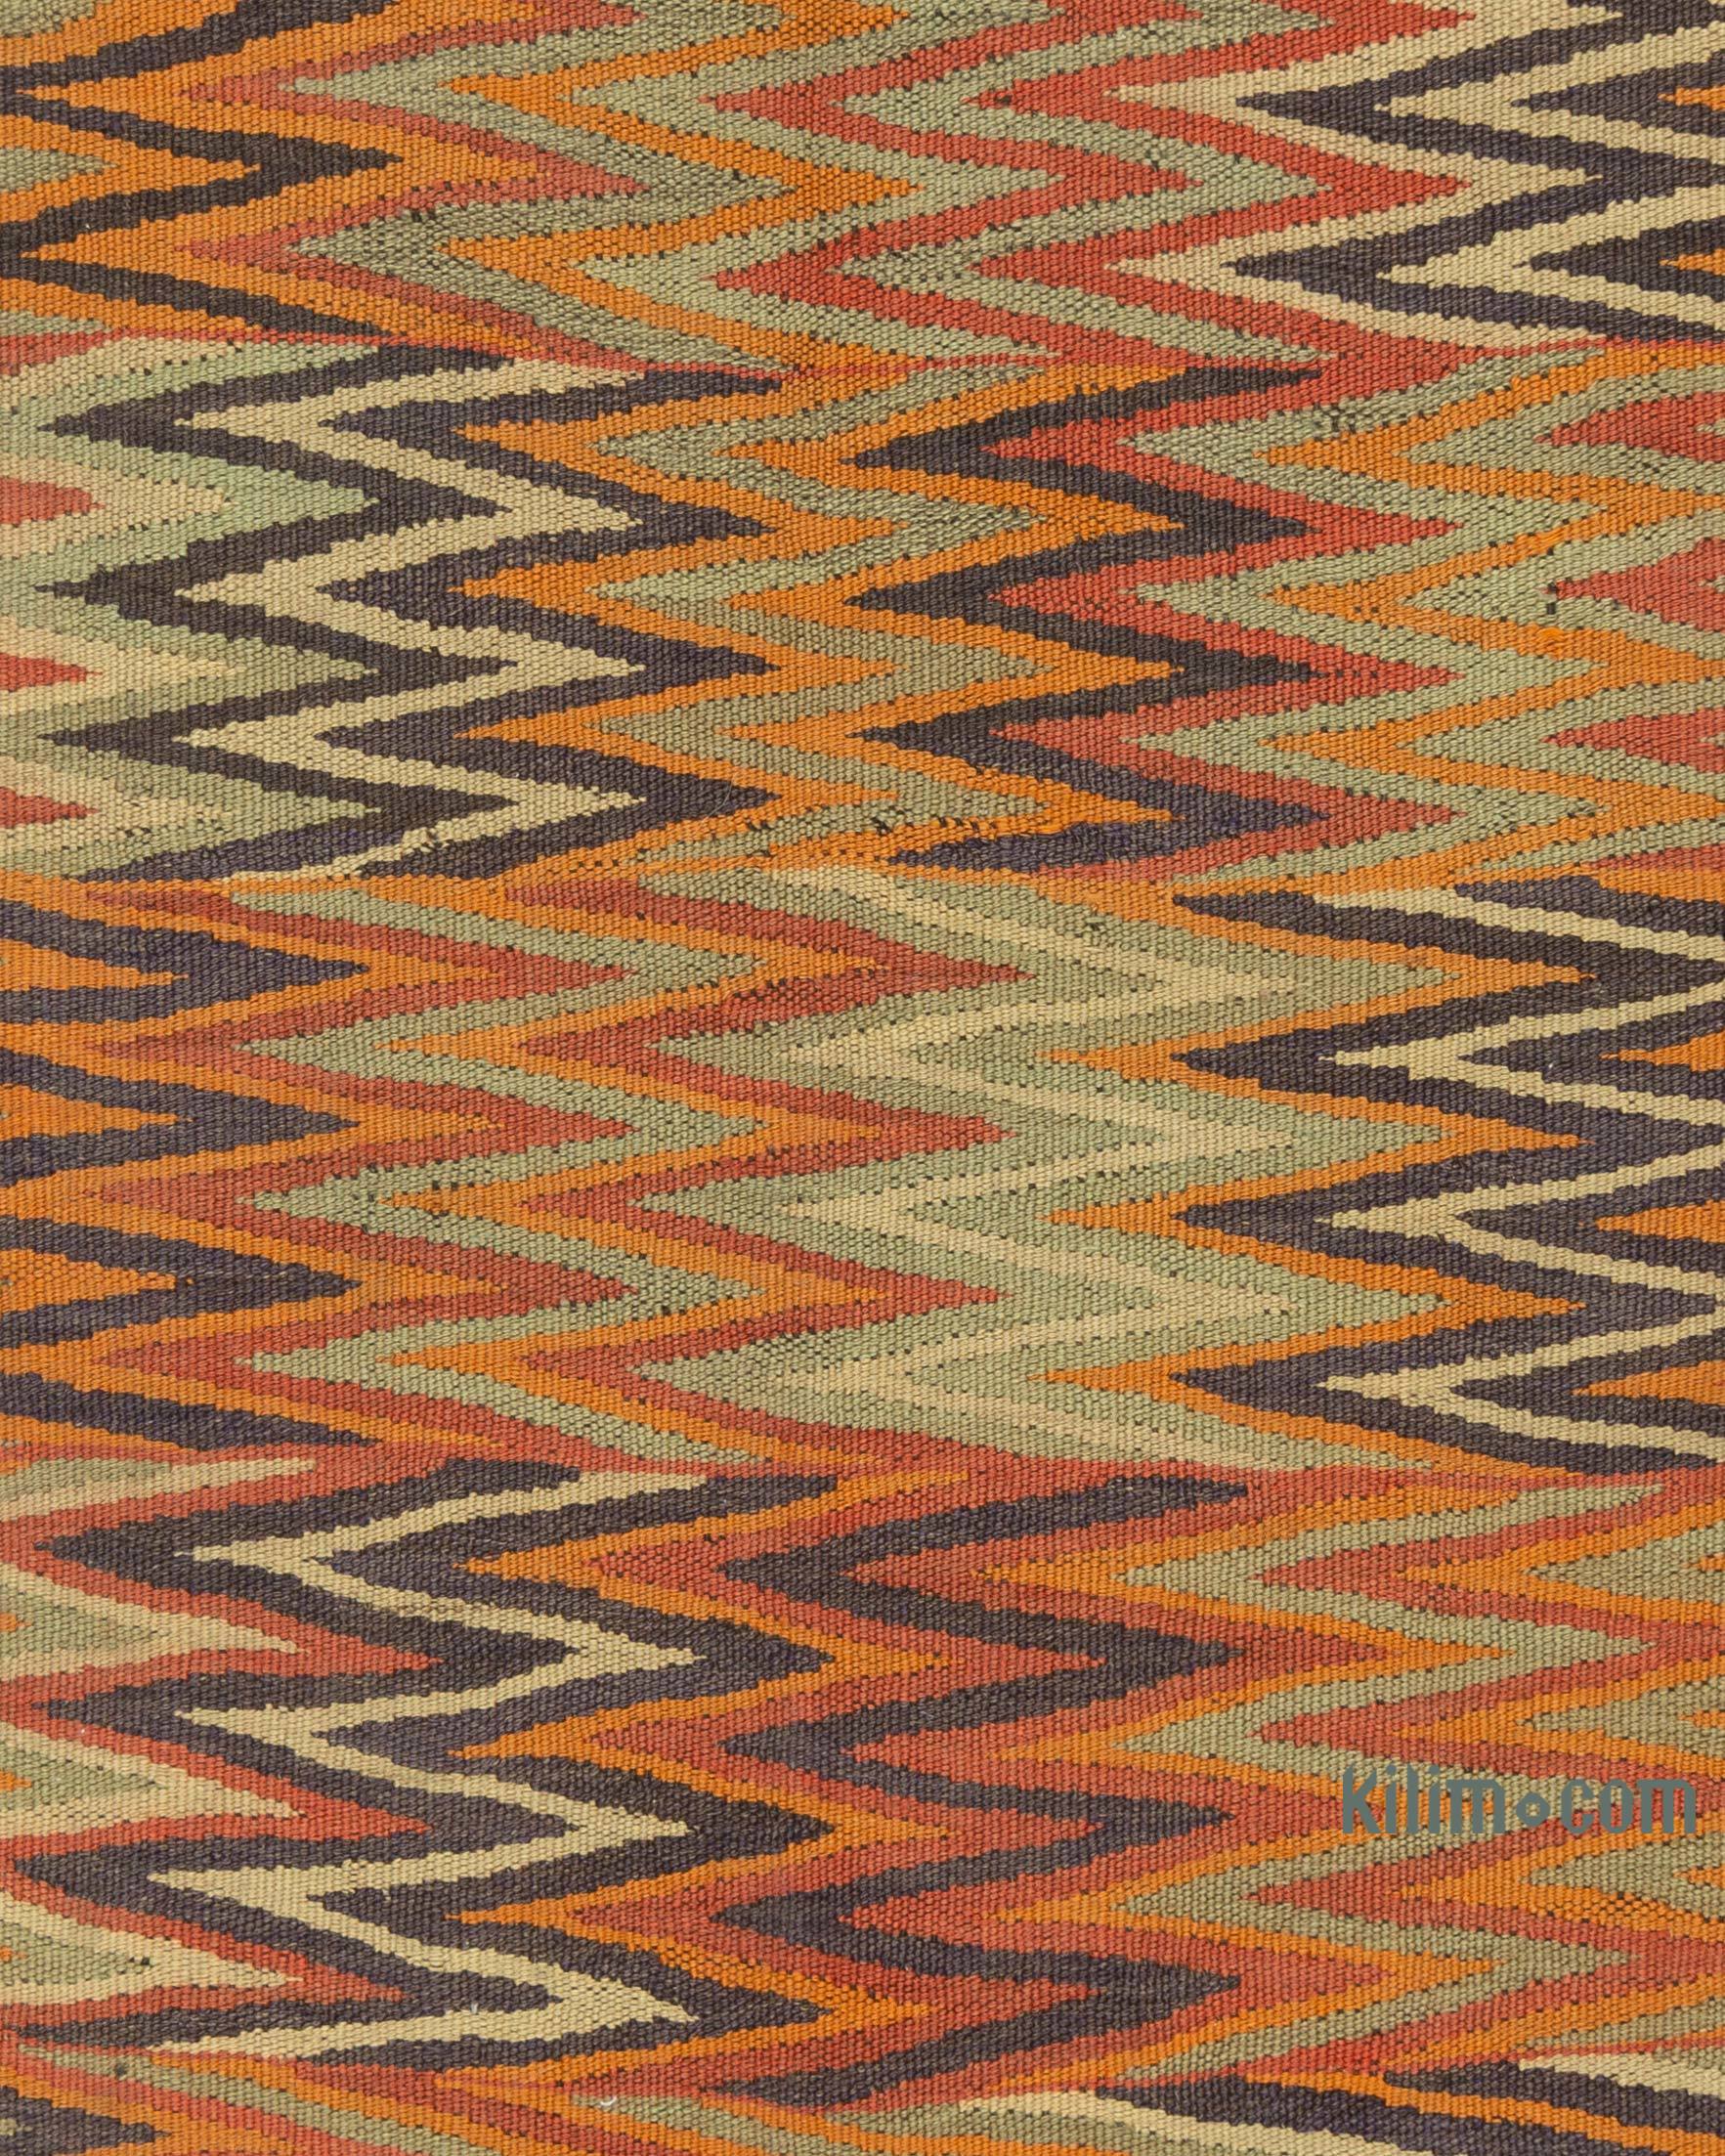 K0066987 Vintage Afyon Kilim Rug - 3' x 4' 8 (36 x 56)  The Source for  Vintage Rugs, Tribal Kilim Rugs, Wool Turkish Rugs, Overdyed Persian Rugs,  Runner Rugs, Patchwork Rugs